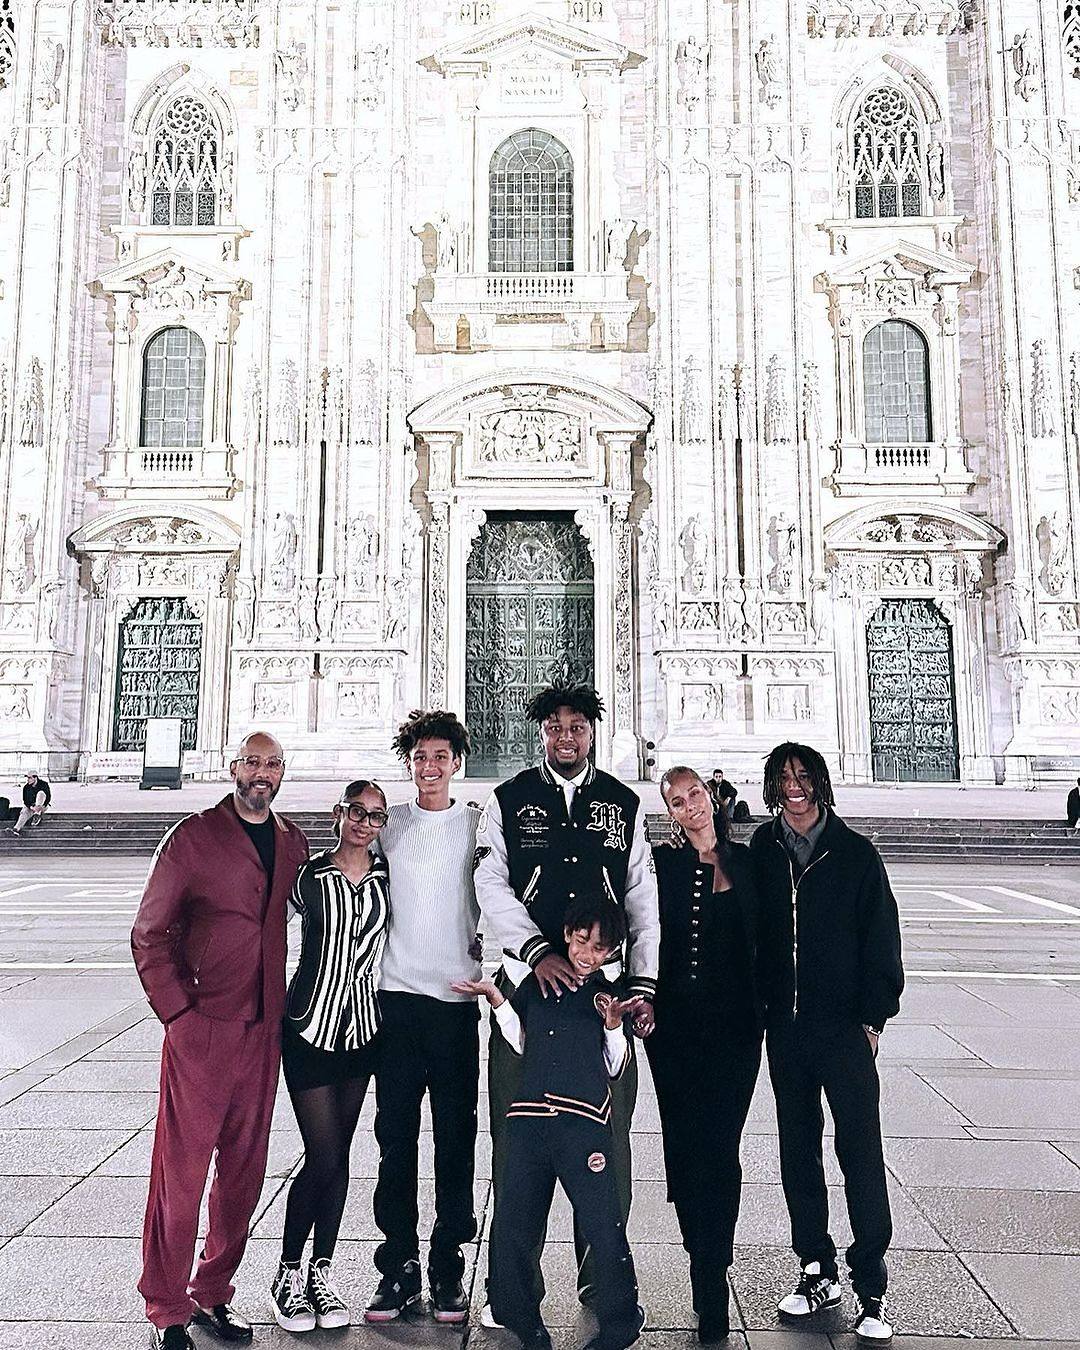 Alicia Keys has a blended family with Swizz Beatz, sharing two kids together as well as three stepchildren. Photo: @aliciakeys/Instagram